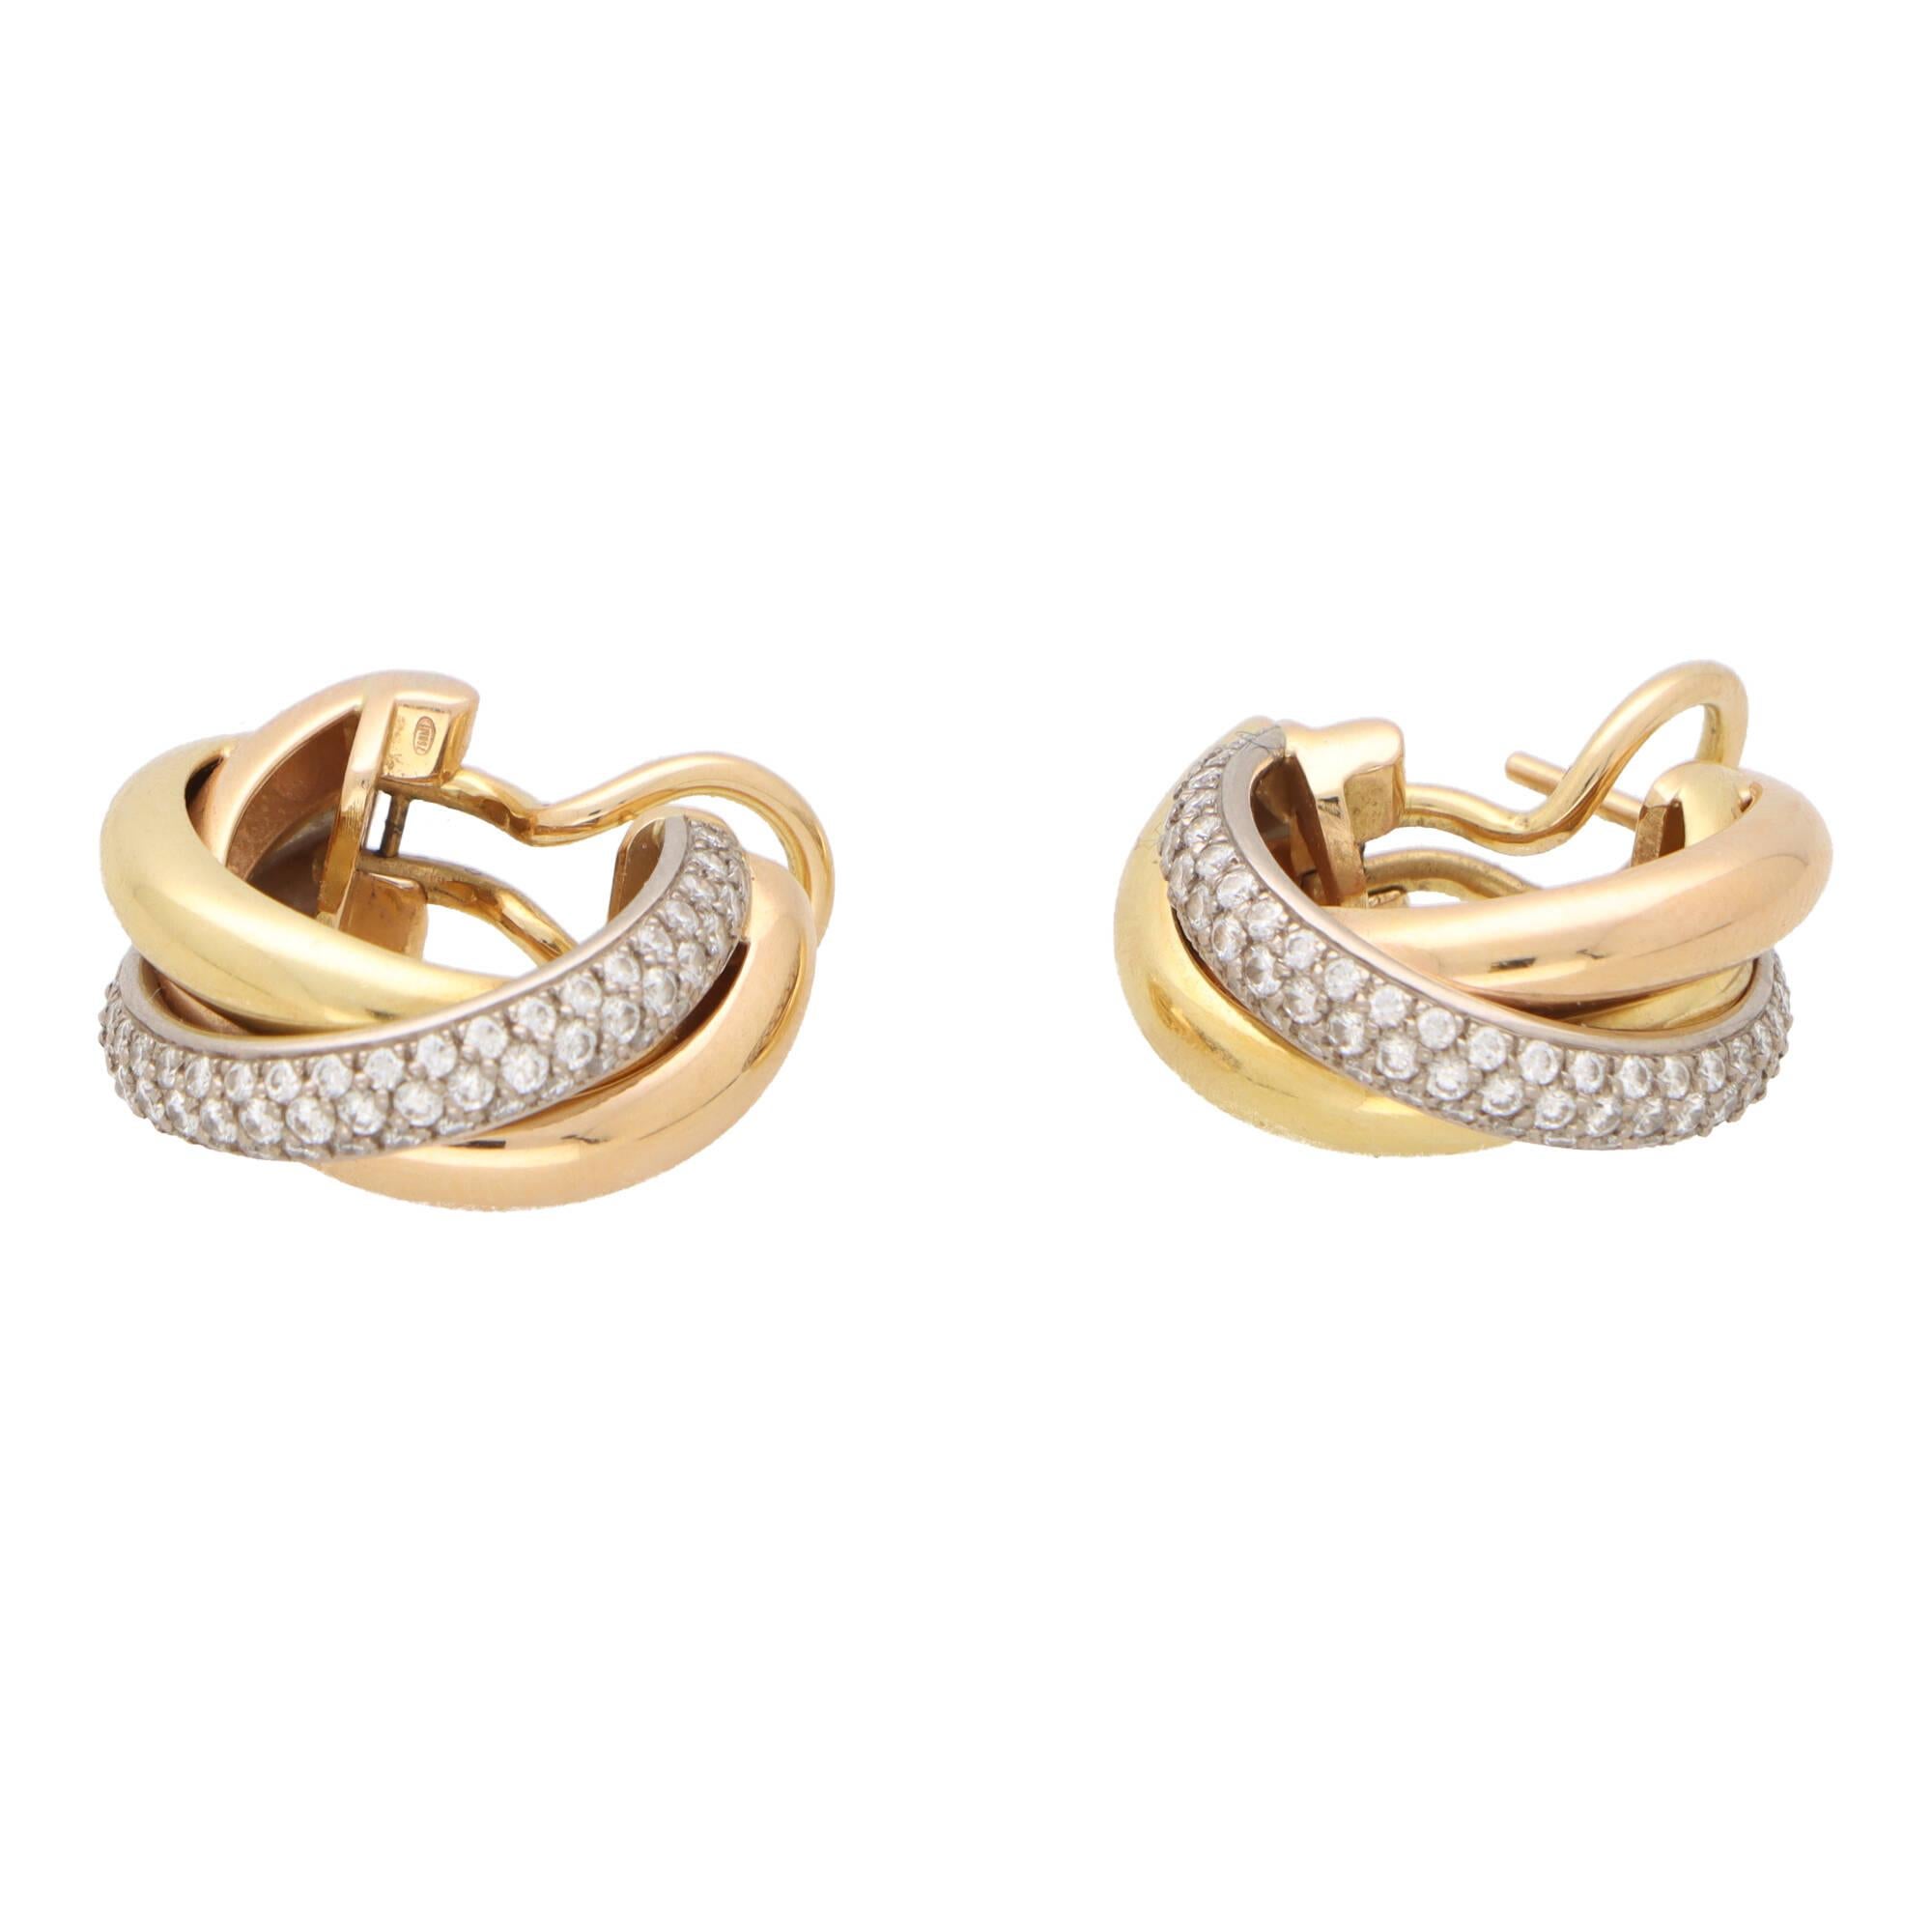 Round Cut Vintage Cartier Diamond Trinity Hoop Earrings in 18k Yellow, Rose and White Gold